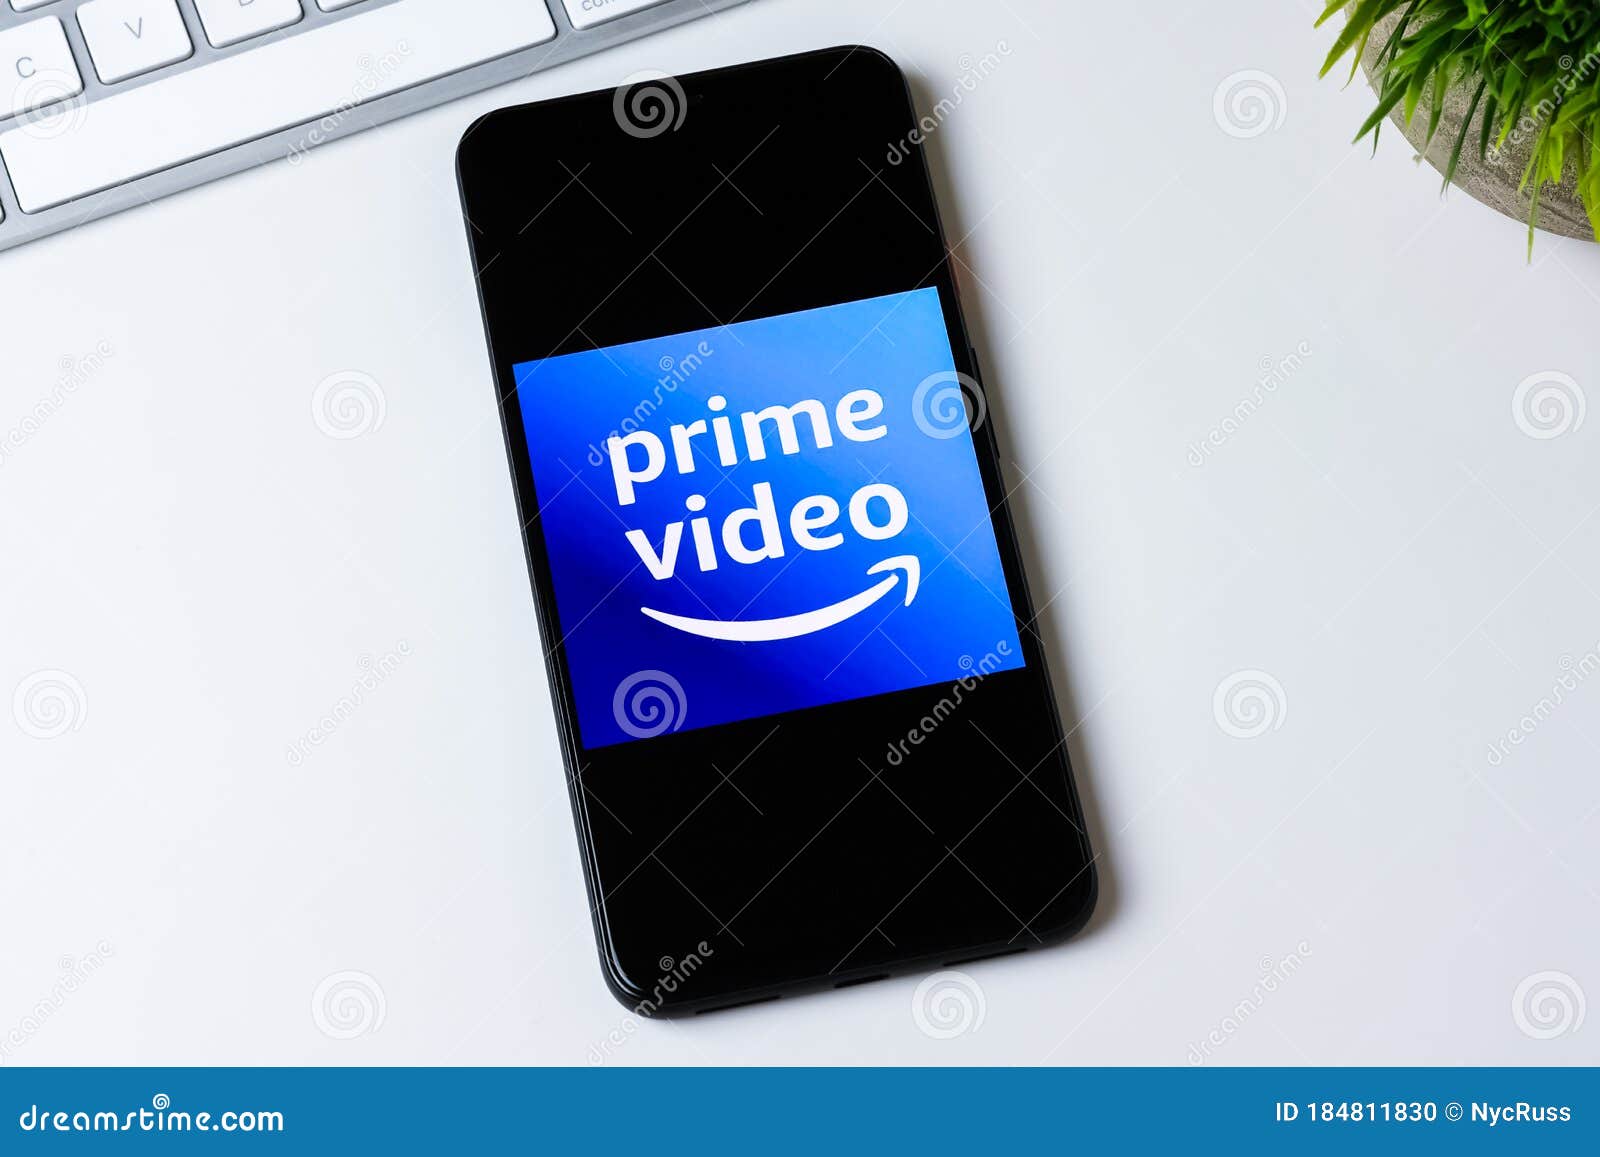 Amazon Prime Video App Logo On A Smartphone Screen Editorial Image Image Of Digital Mobile